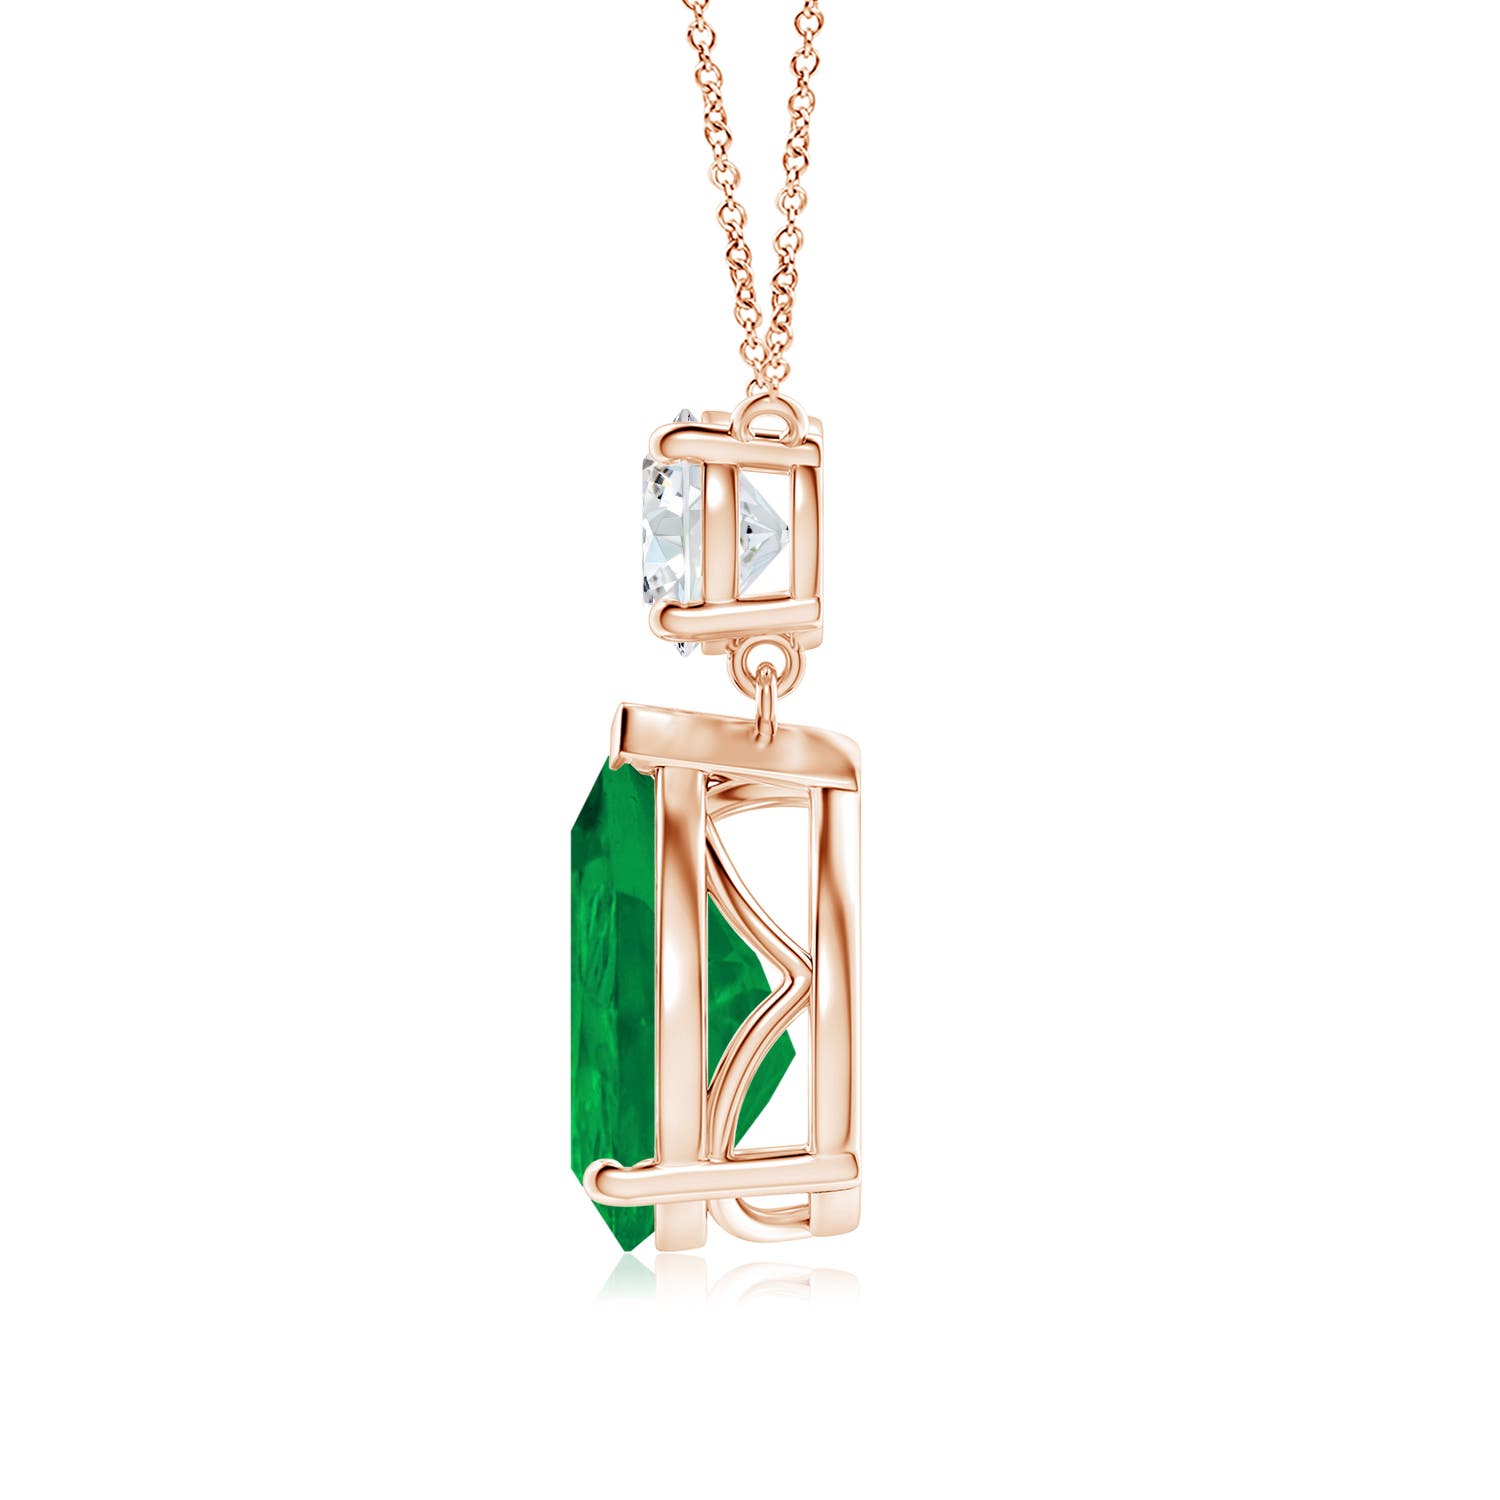 AA - Emerald / 5.21 CT / 18 KT Rose Gold